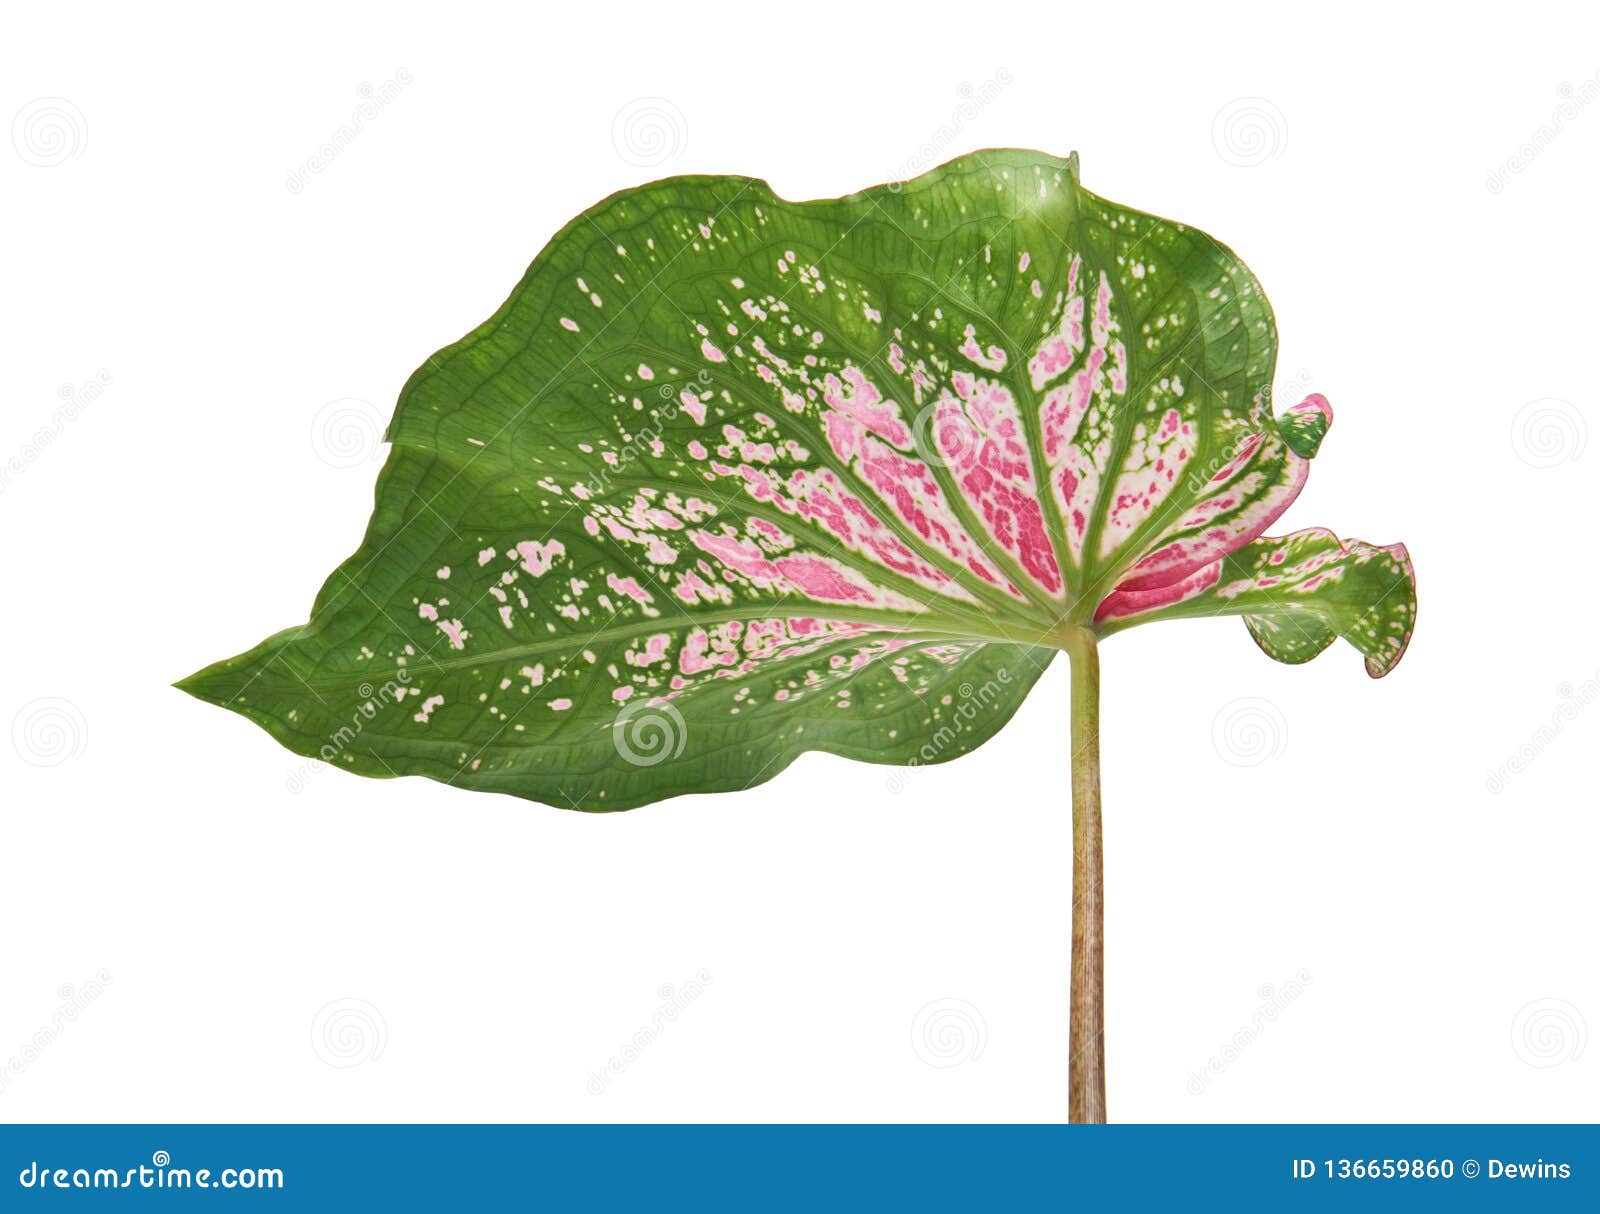 Caladium Bicolor with Pink Leaf and Green Veins Florida Sweetheart ...